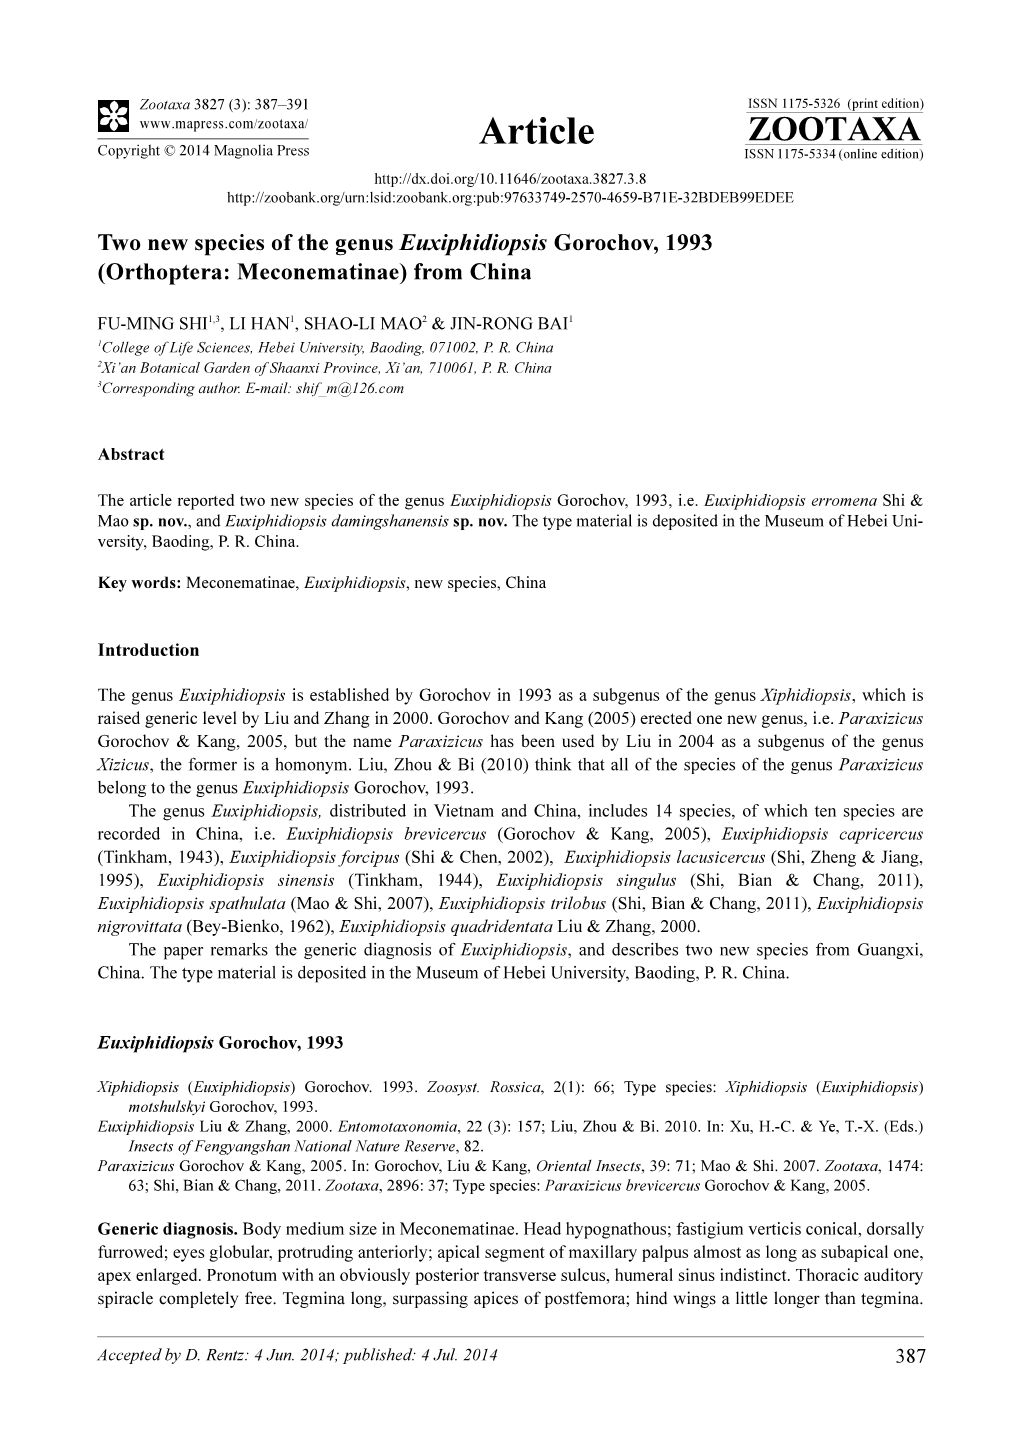 Two New Species of the Genus Euxiphidiopsis Gorochov, 1993 (Orthoptera: Meconematinae) from China